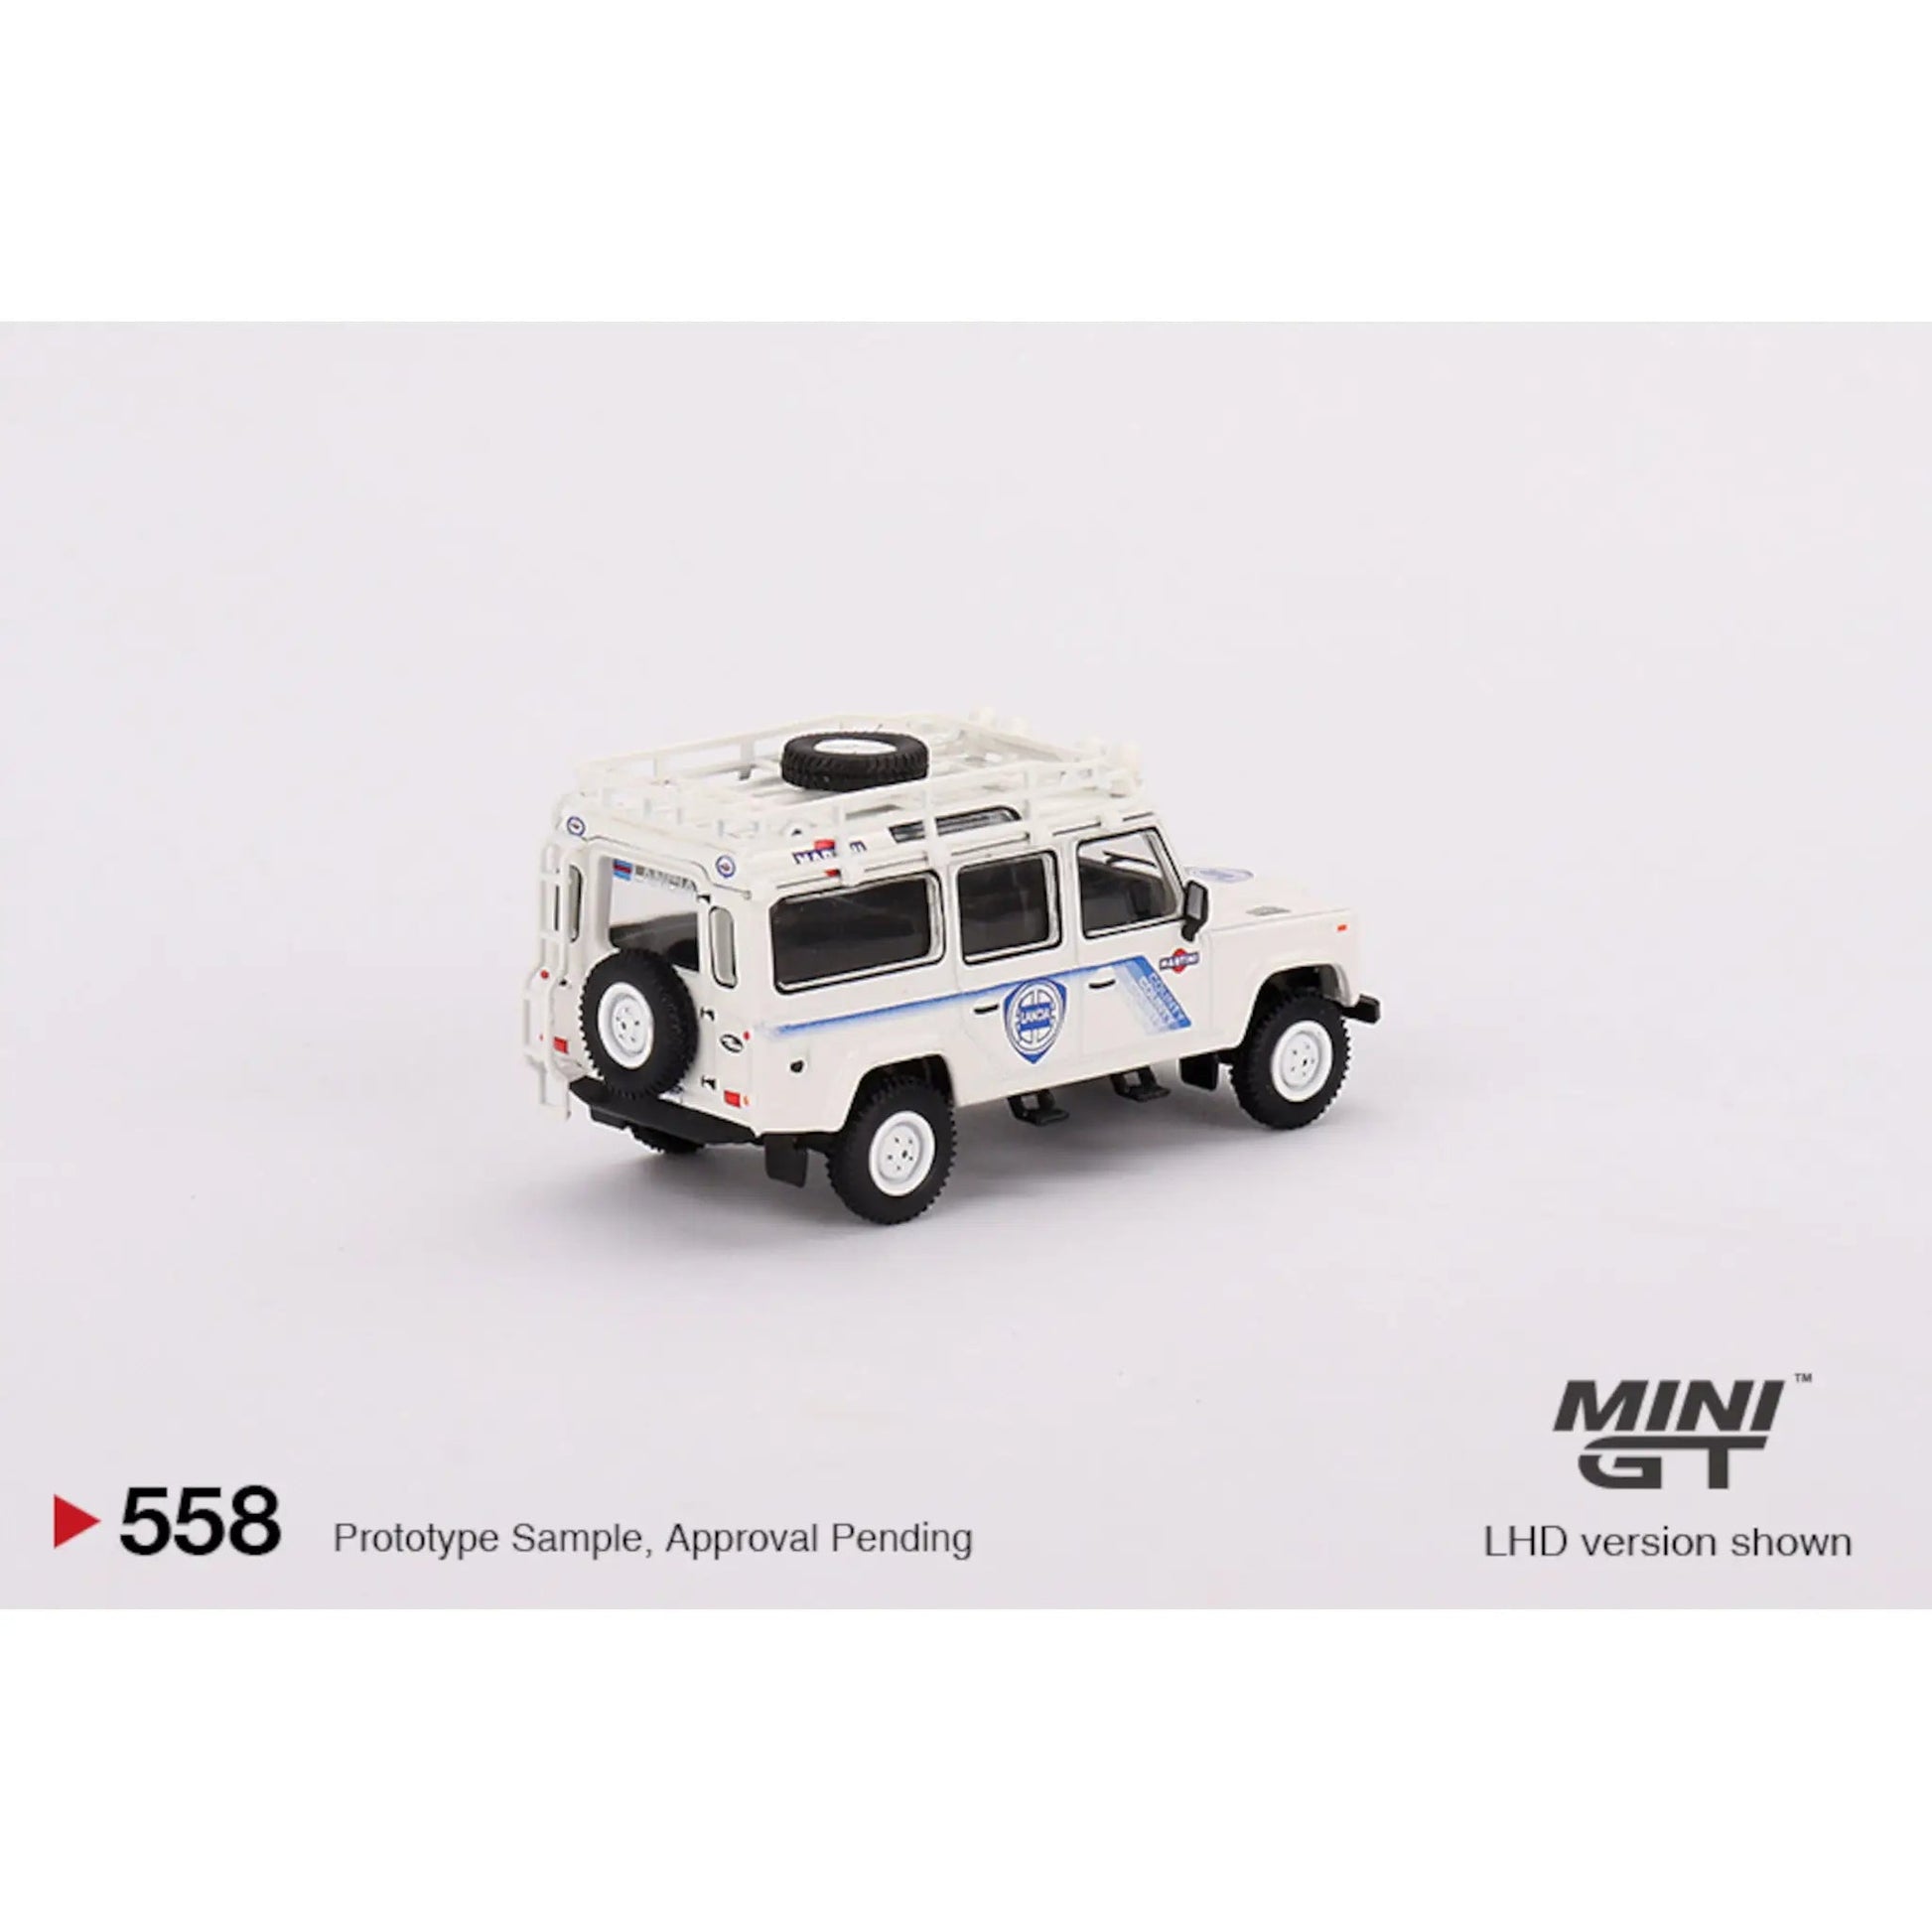 Land Rover Defender 110 1991 LHD Safari Rally Martini support vehicle Mini GT 1/64 - MGT00558lhd